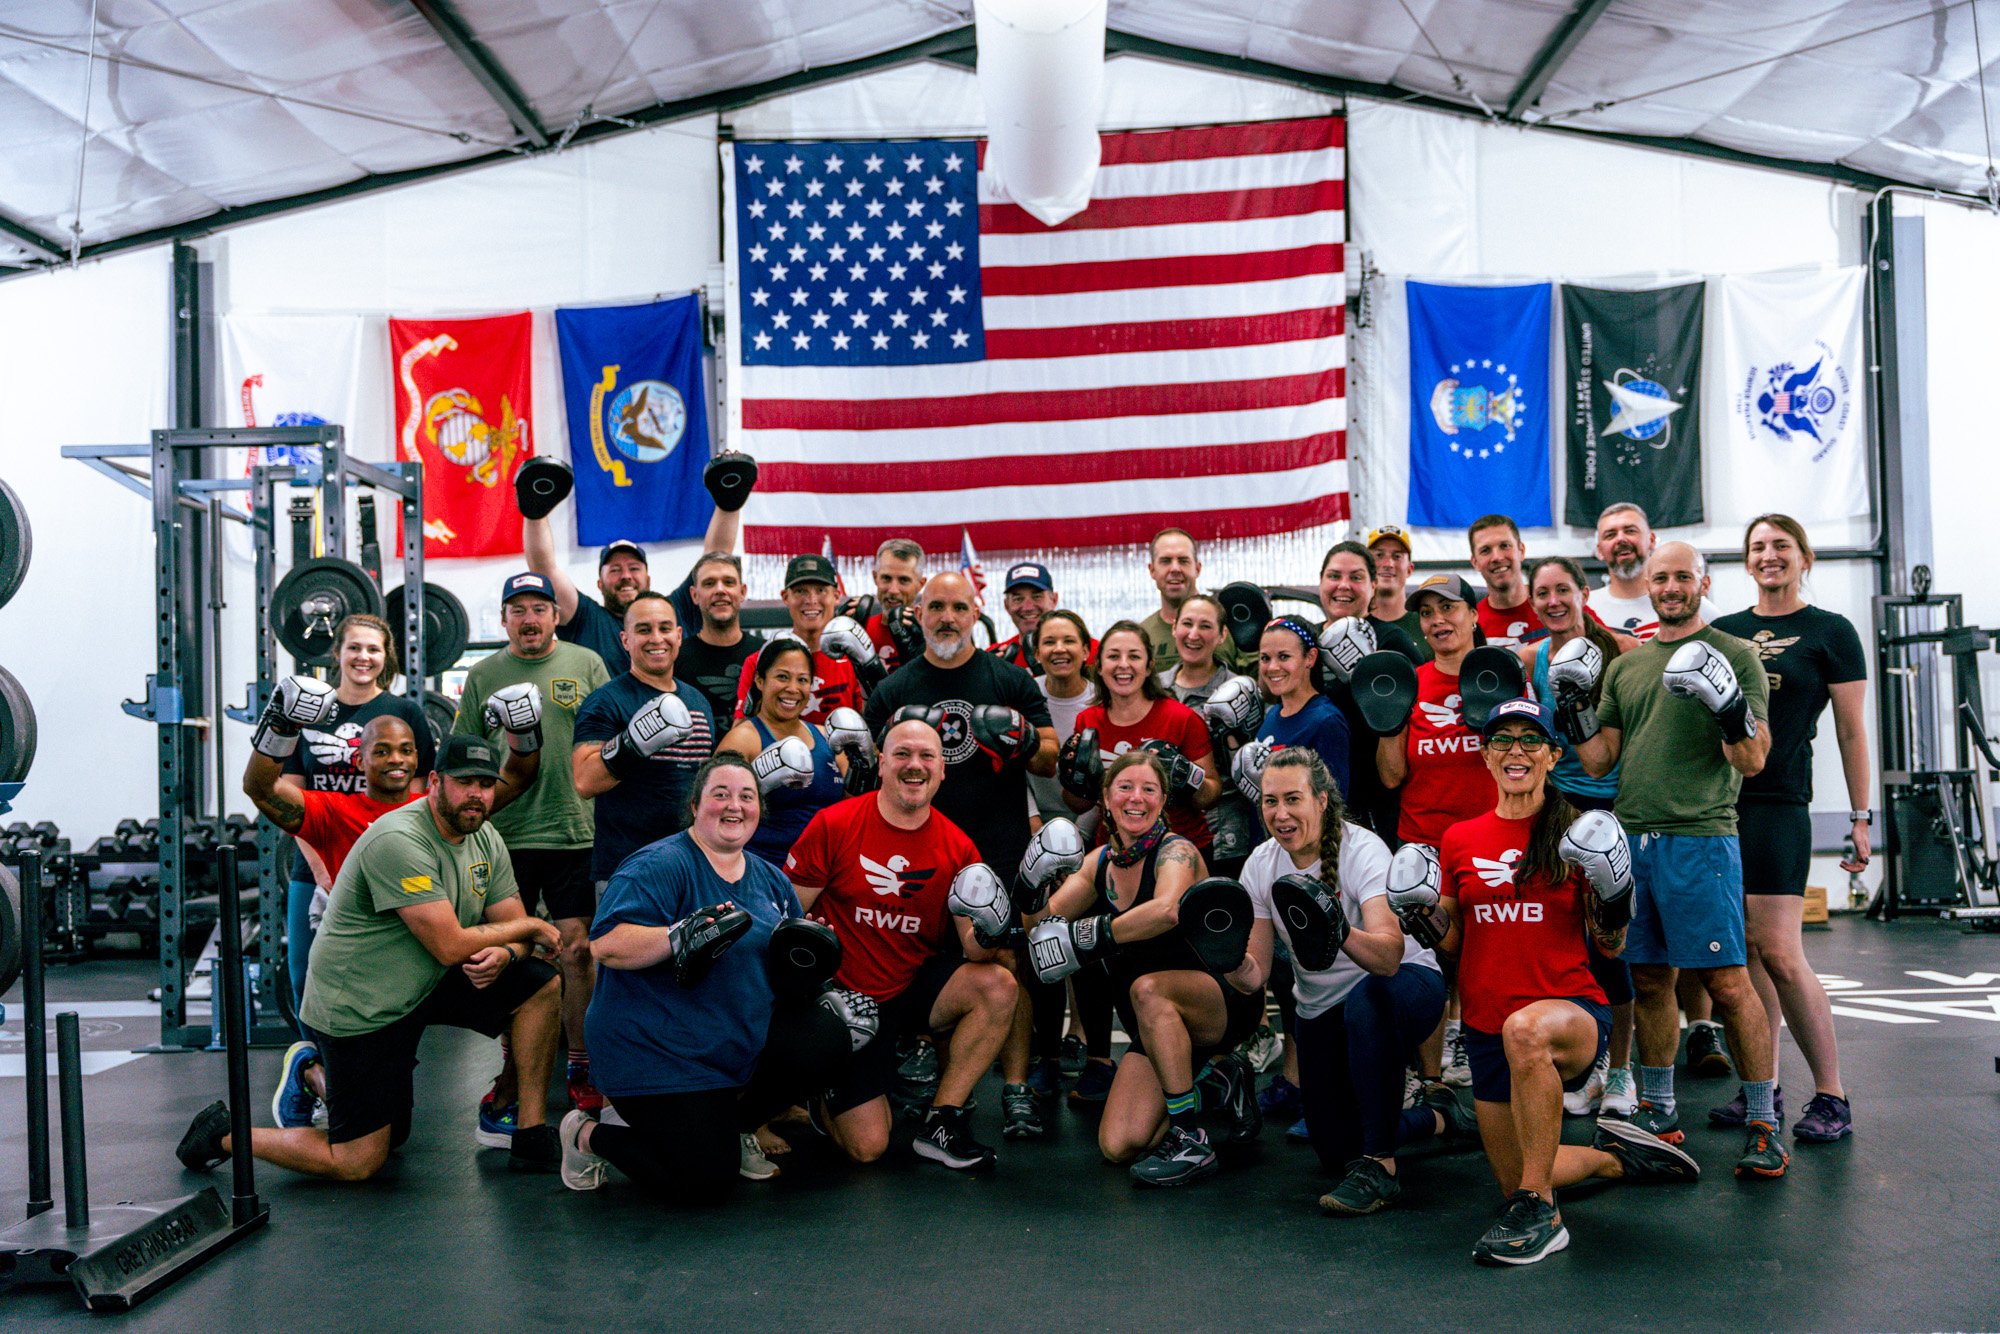 Team RWB staff standing in front of the American flag and all branch flags inside a gyme.